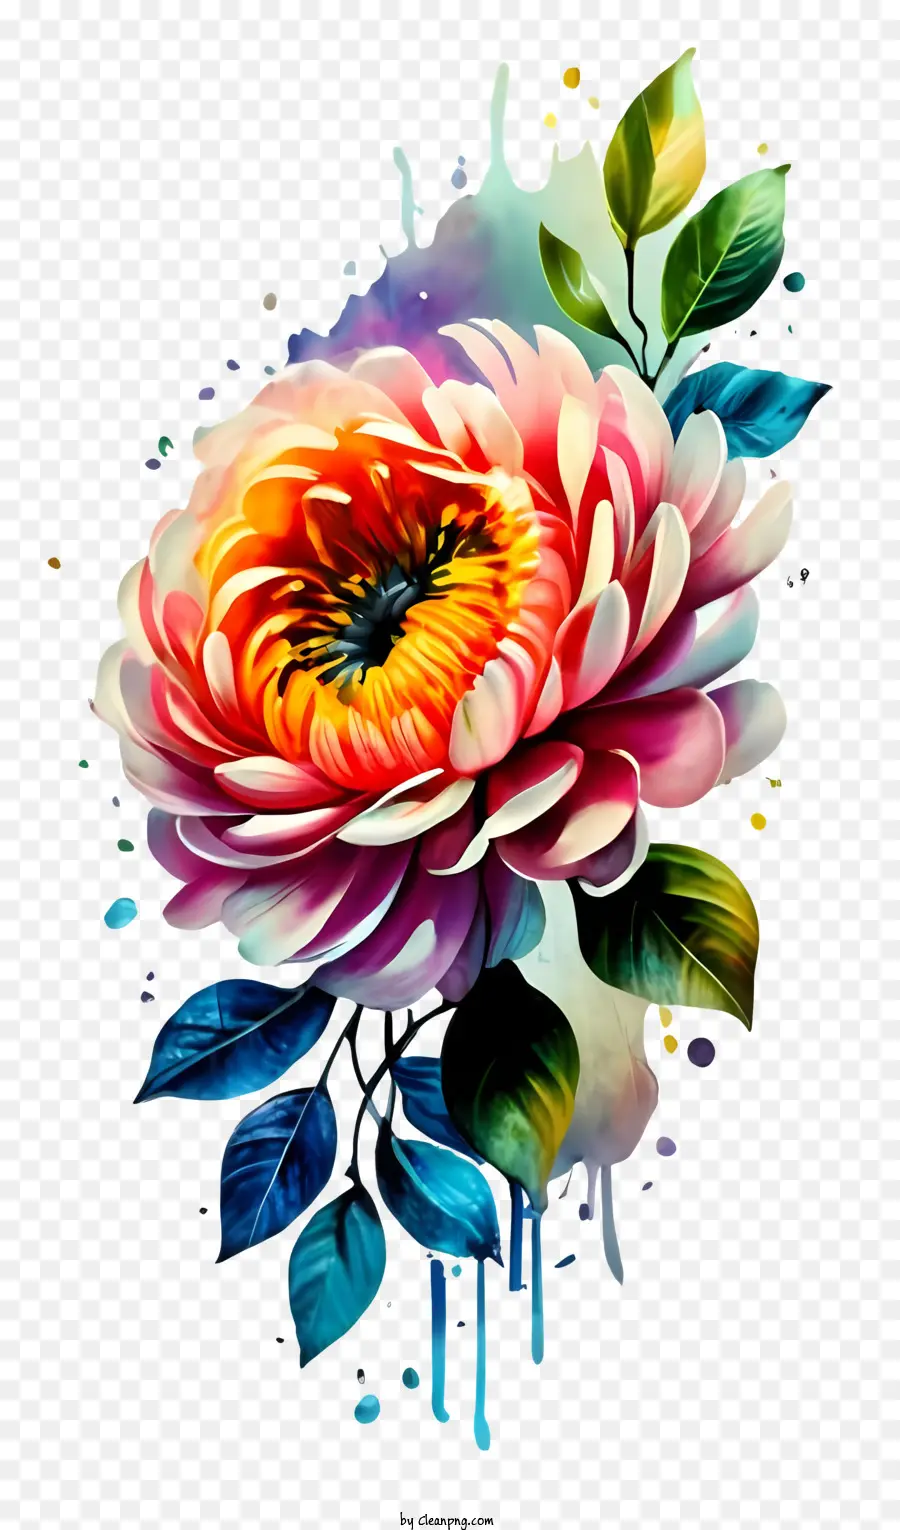 watercolor illustration large flower vibrant colors bright yellow center pink petals